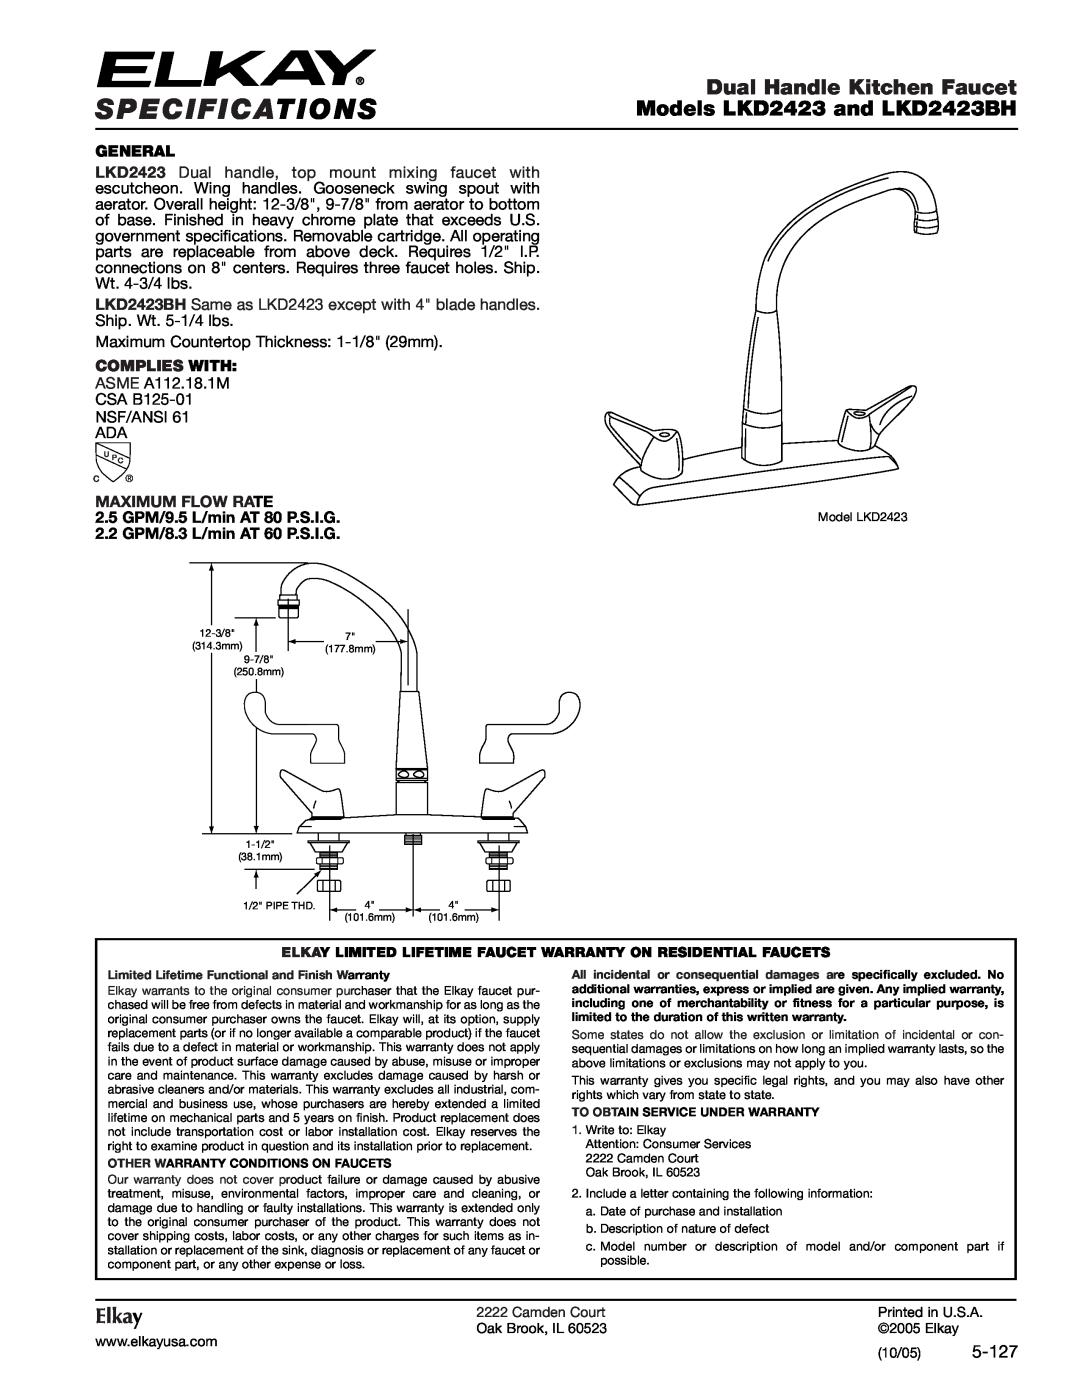 Elkay specifications Specifications, Dual Handle Kitchen Faucet, Models LKD2423 and LKD2423BH, Elkay, General, 5-127 